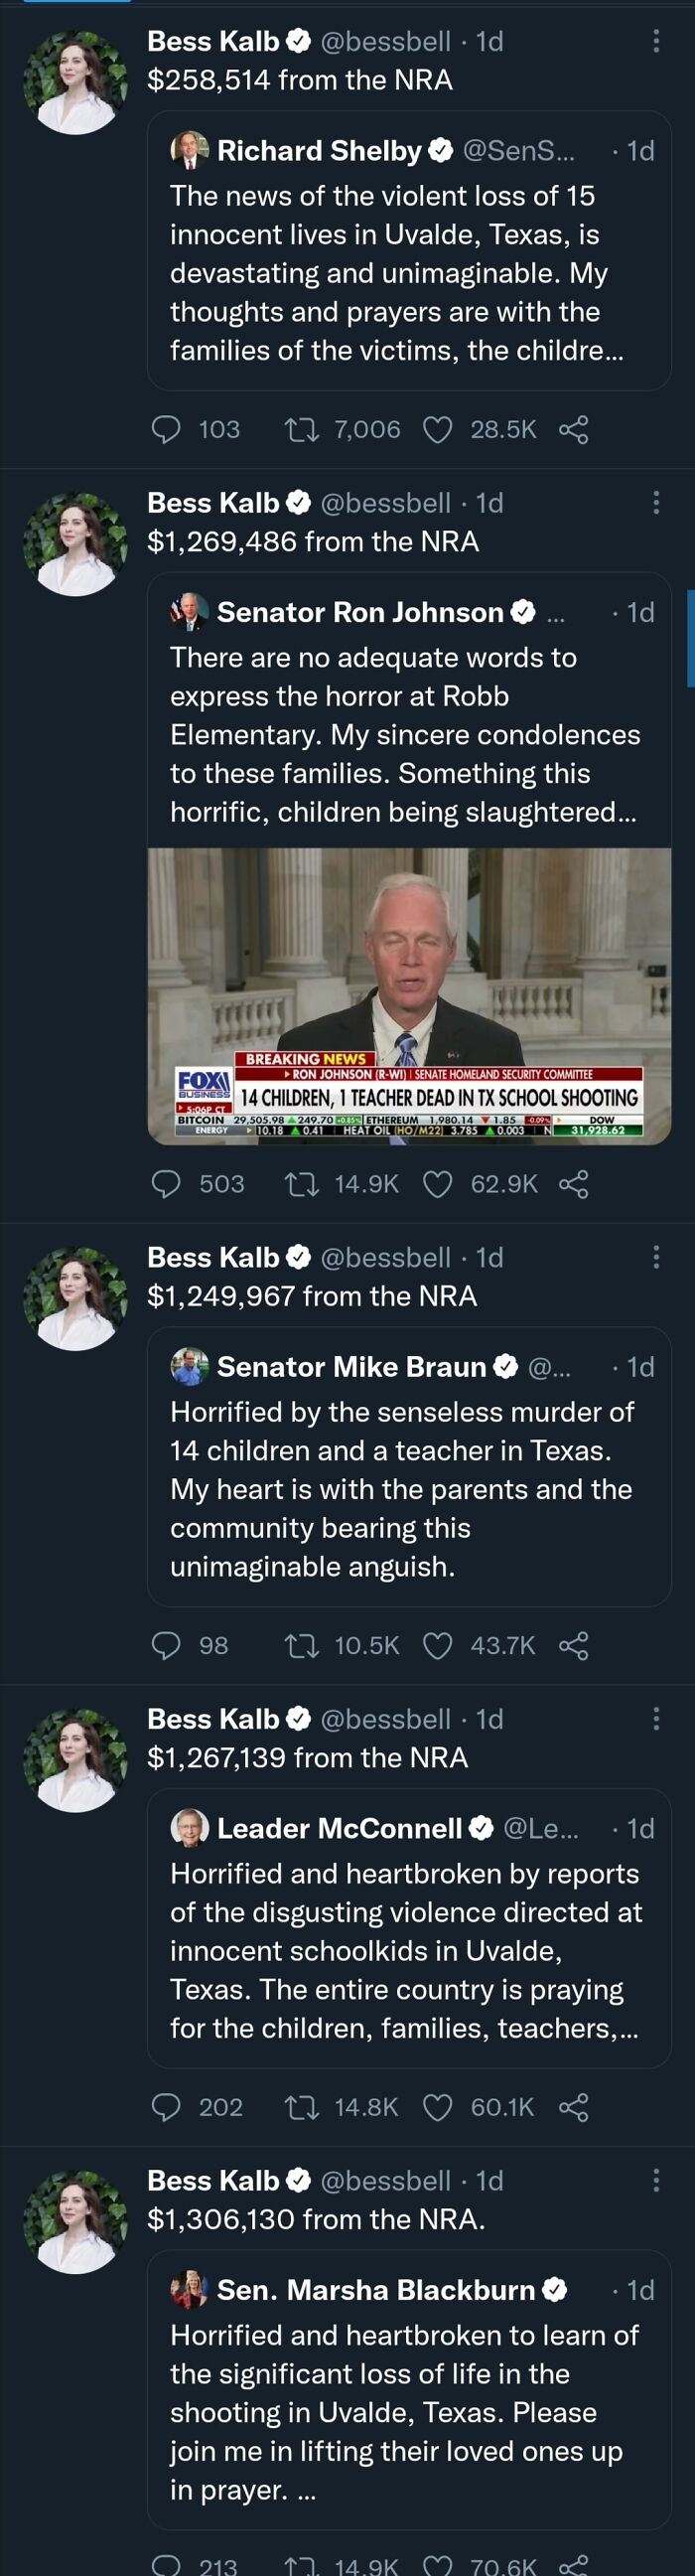 This Journalist Retweets Every Statement Made In Light Of The Recent Shooting With The Amount Of Money The Person Speaking Has Gotten From The Nra